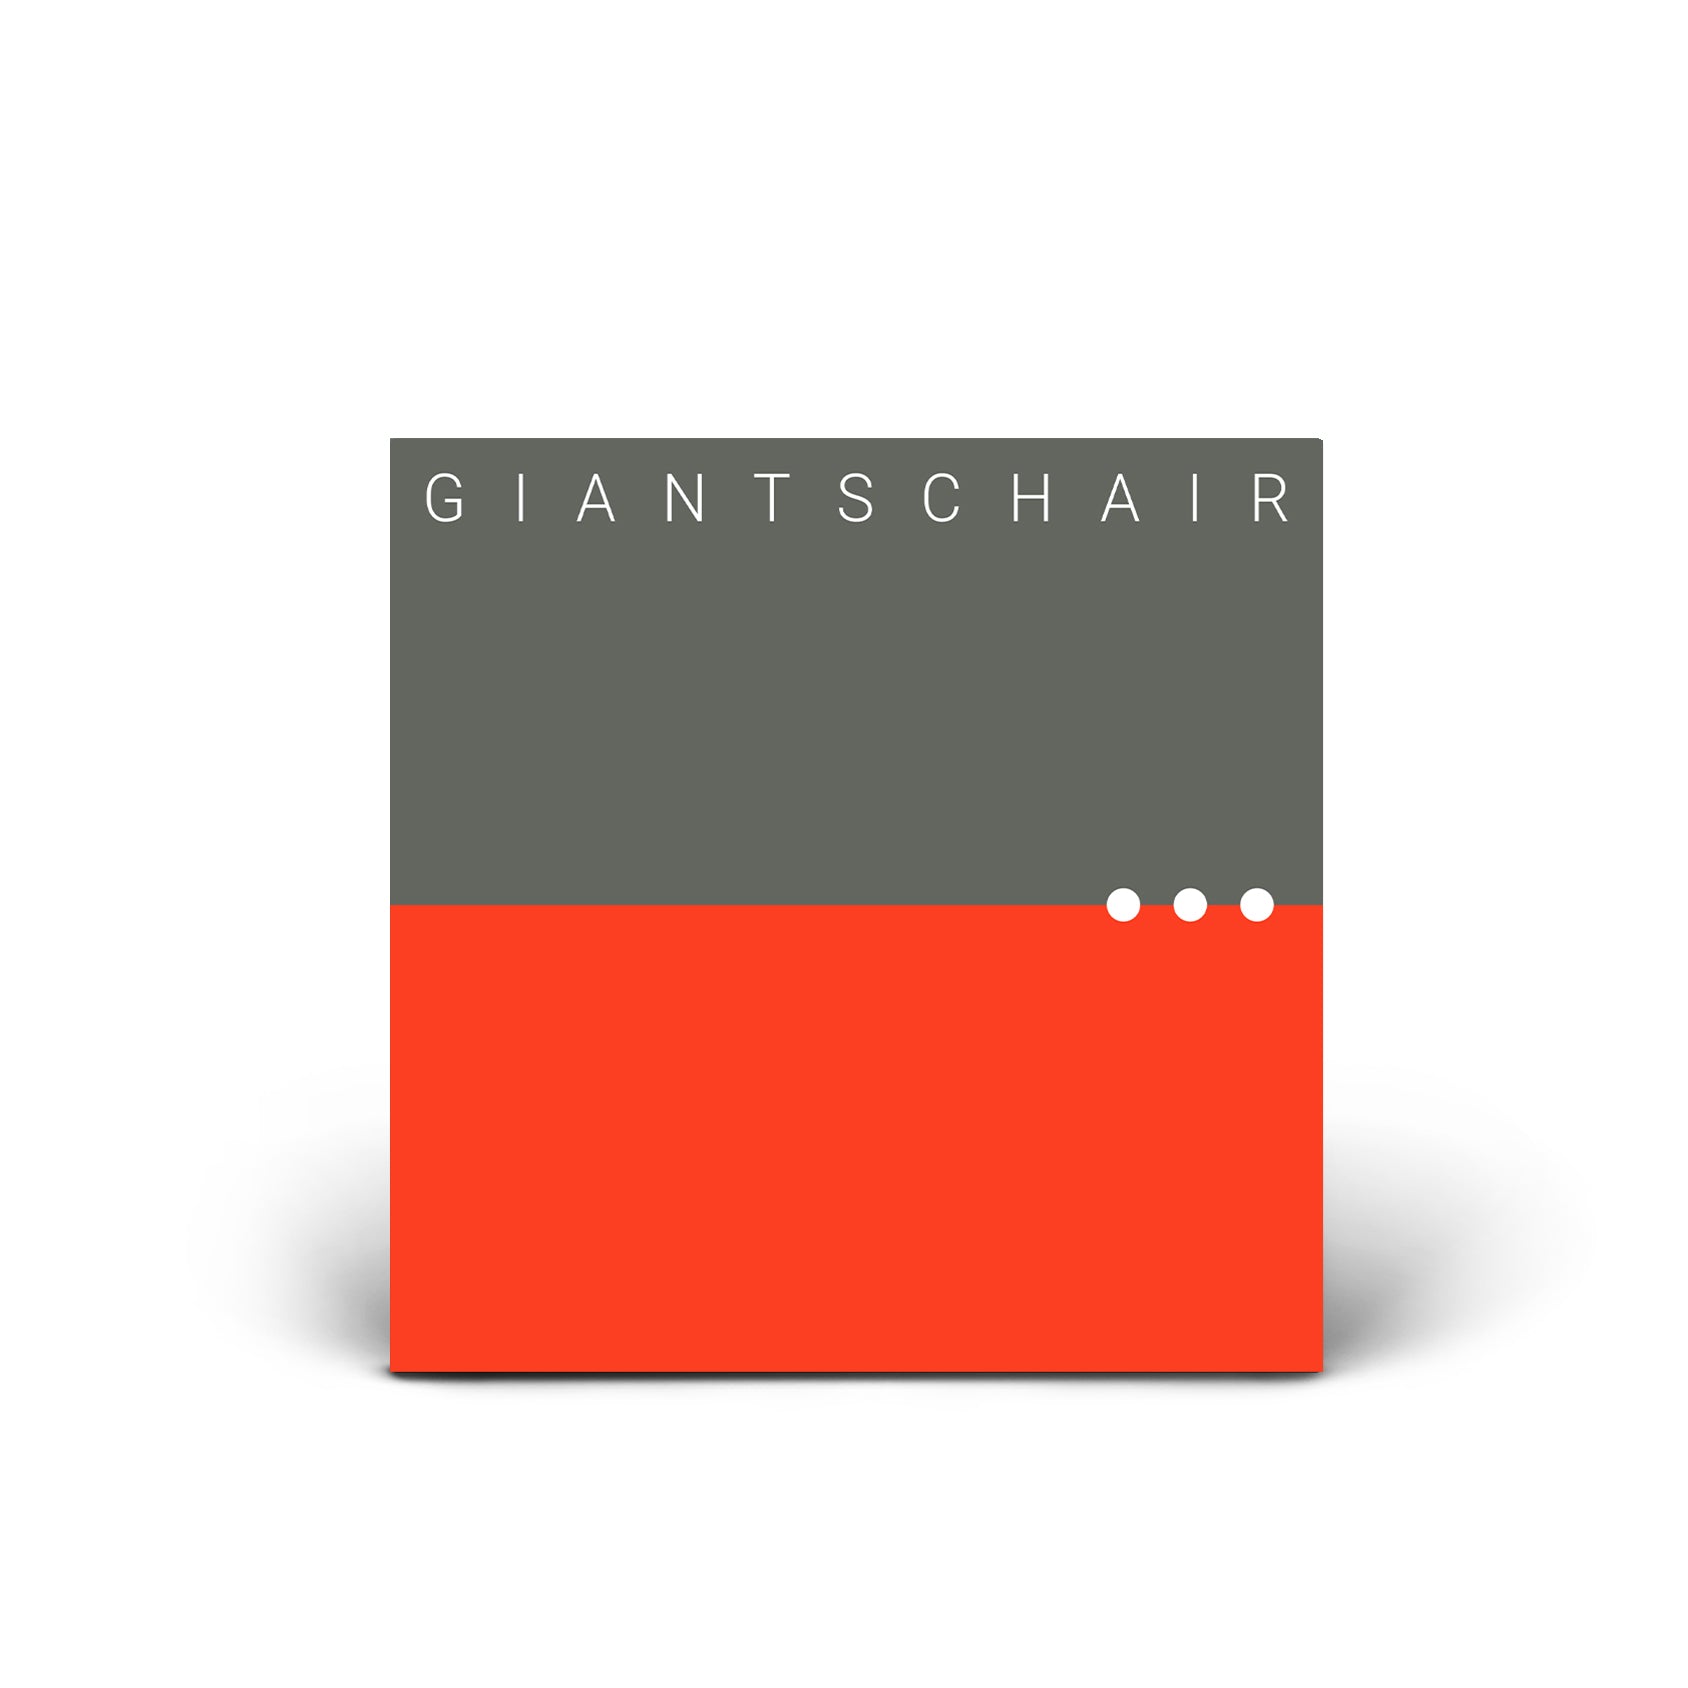 Giants Chair - The Streets EP